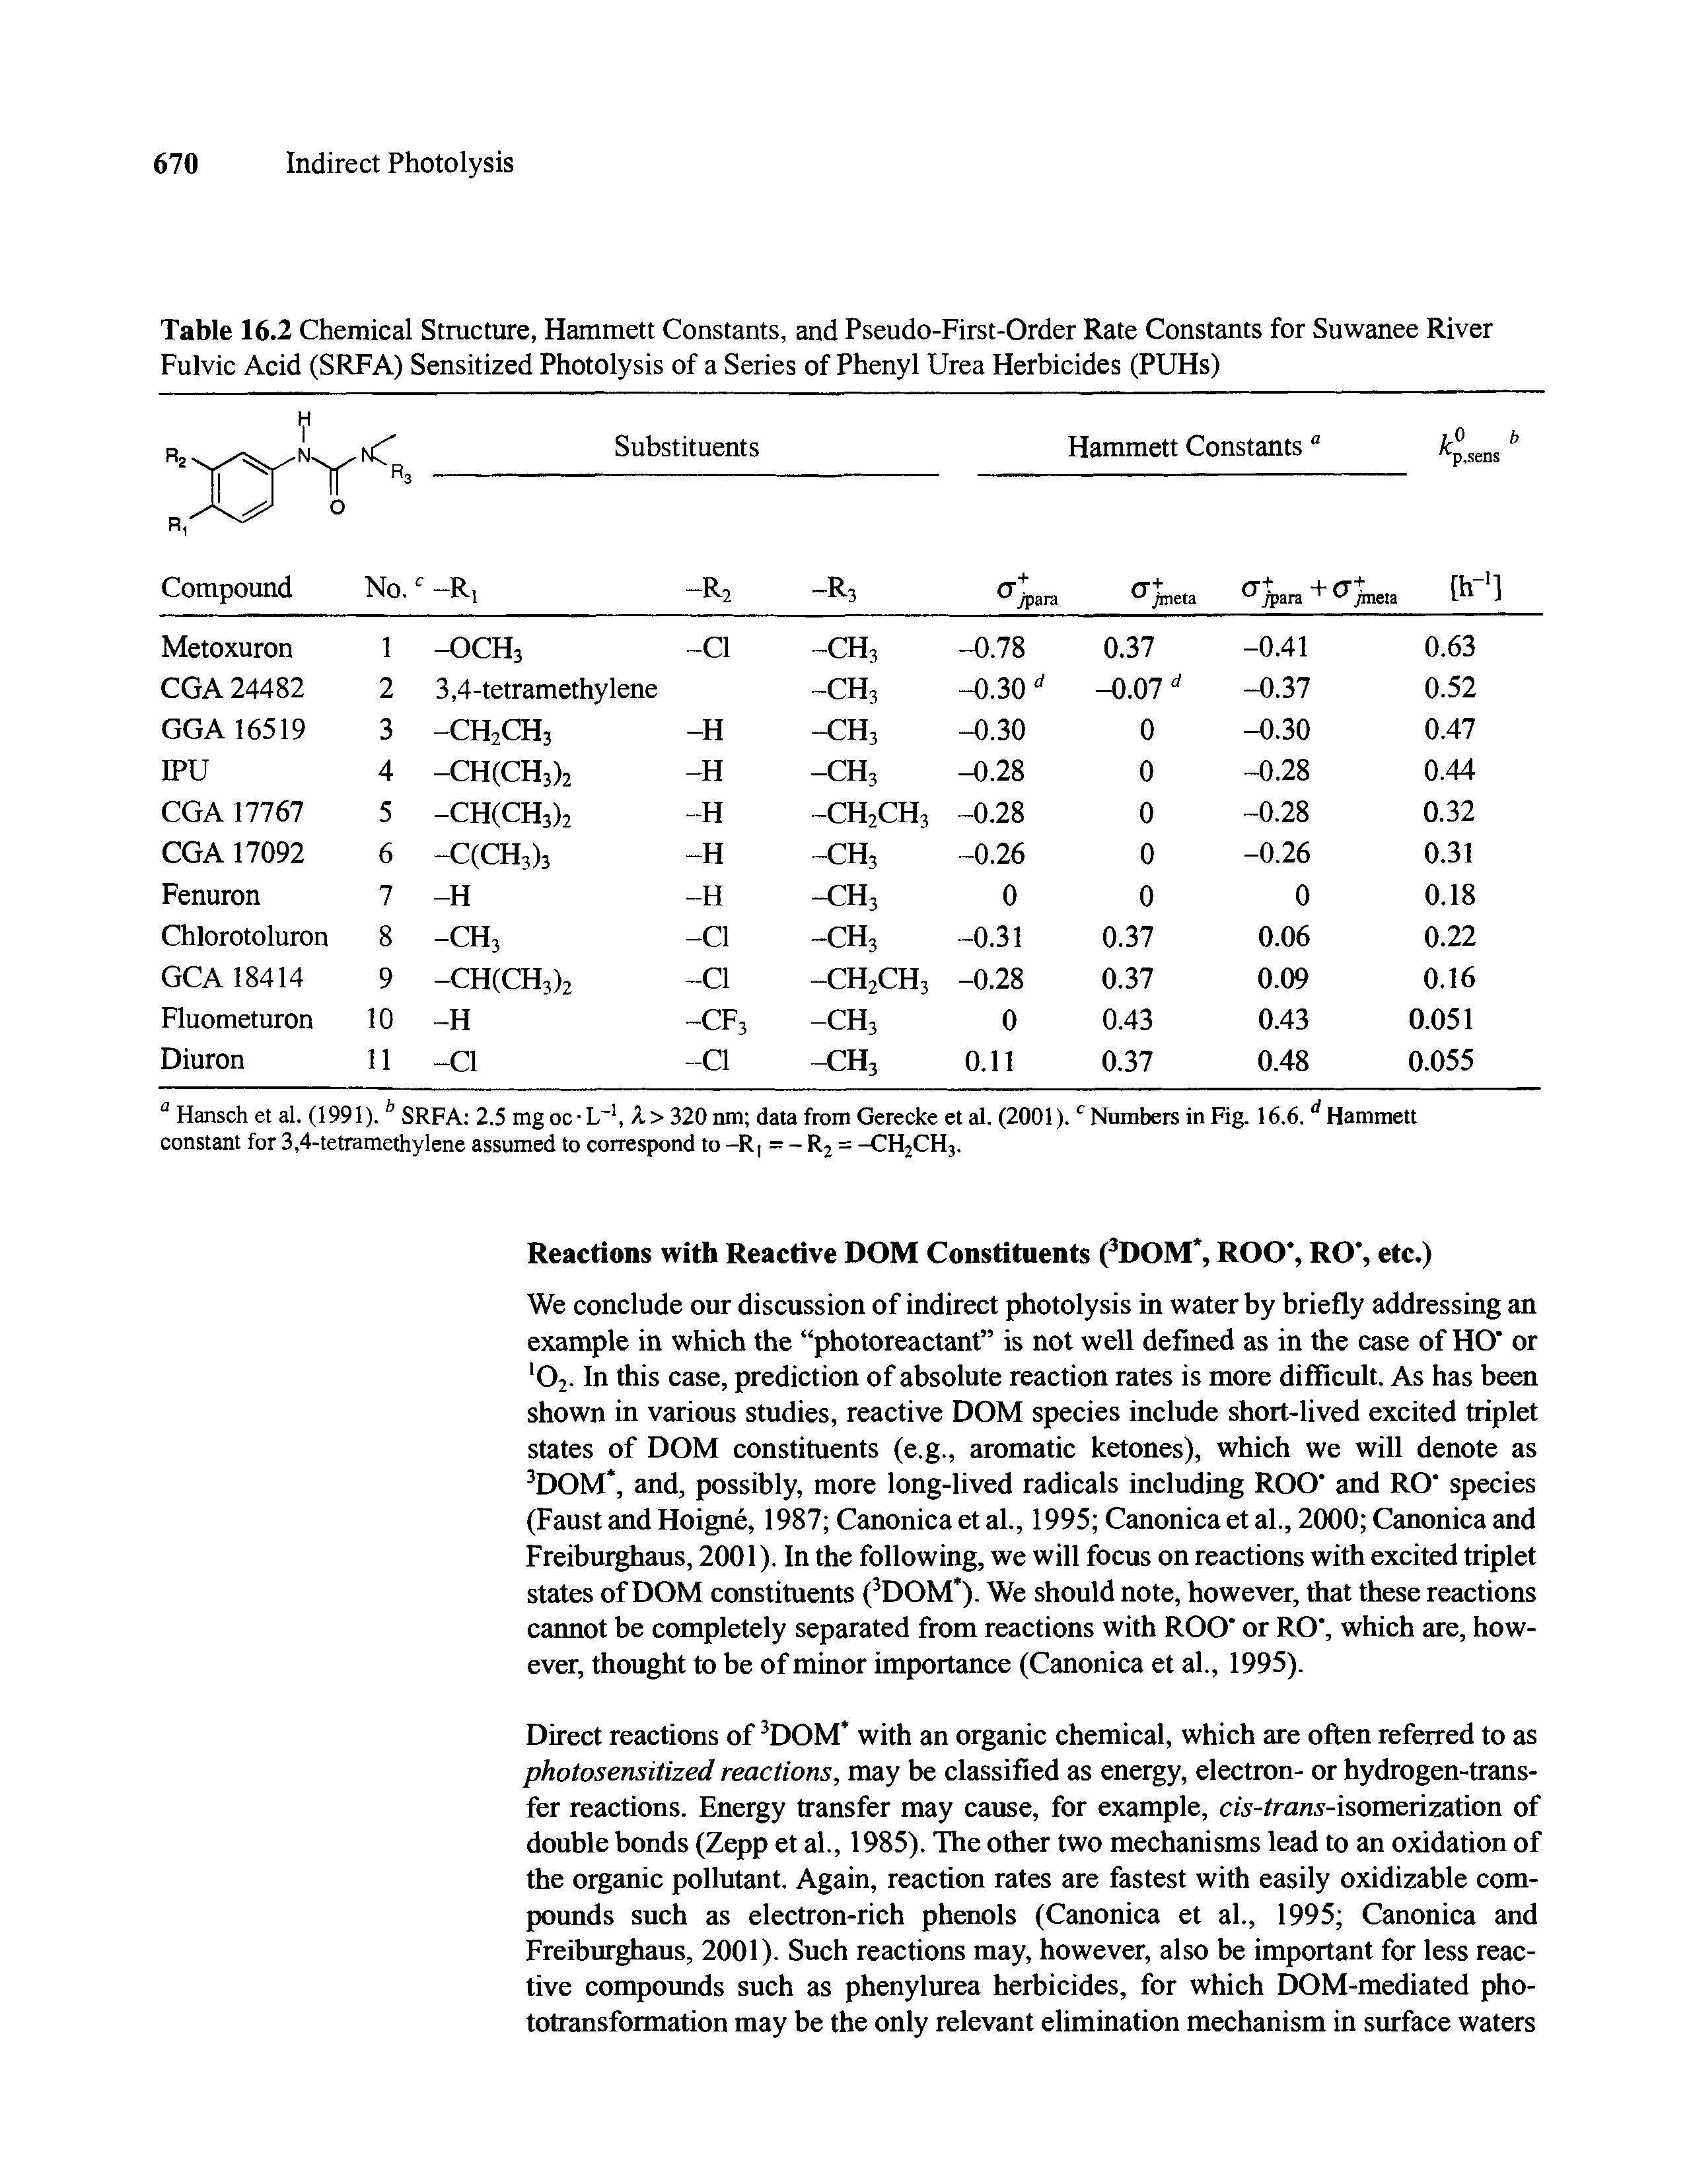 Table 16.2 Chemical Structure, Hammett Constants, and Pseudo-First-Order Rate Constants for Suwanee River Fulvic Acid (SRFA) Sensitized Photolysis of a Series of Phenyl Urea Herbicides (PUHs)...